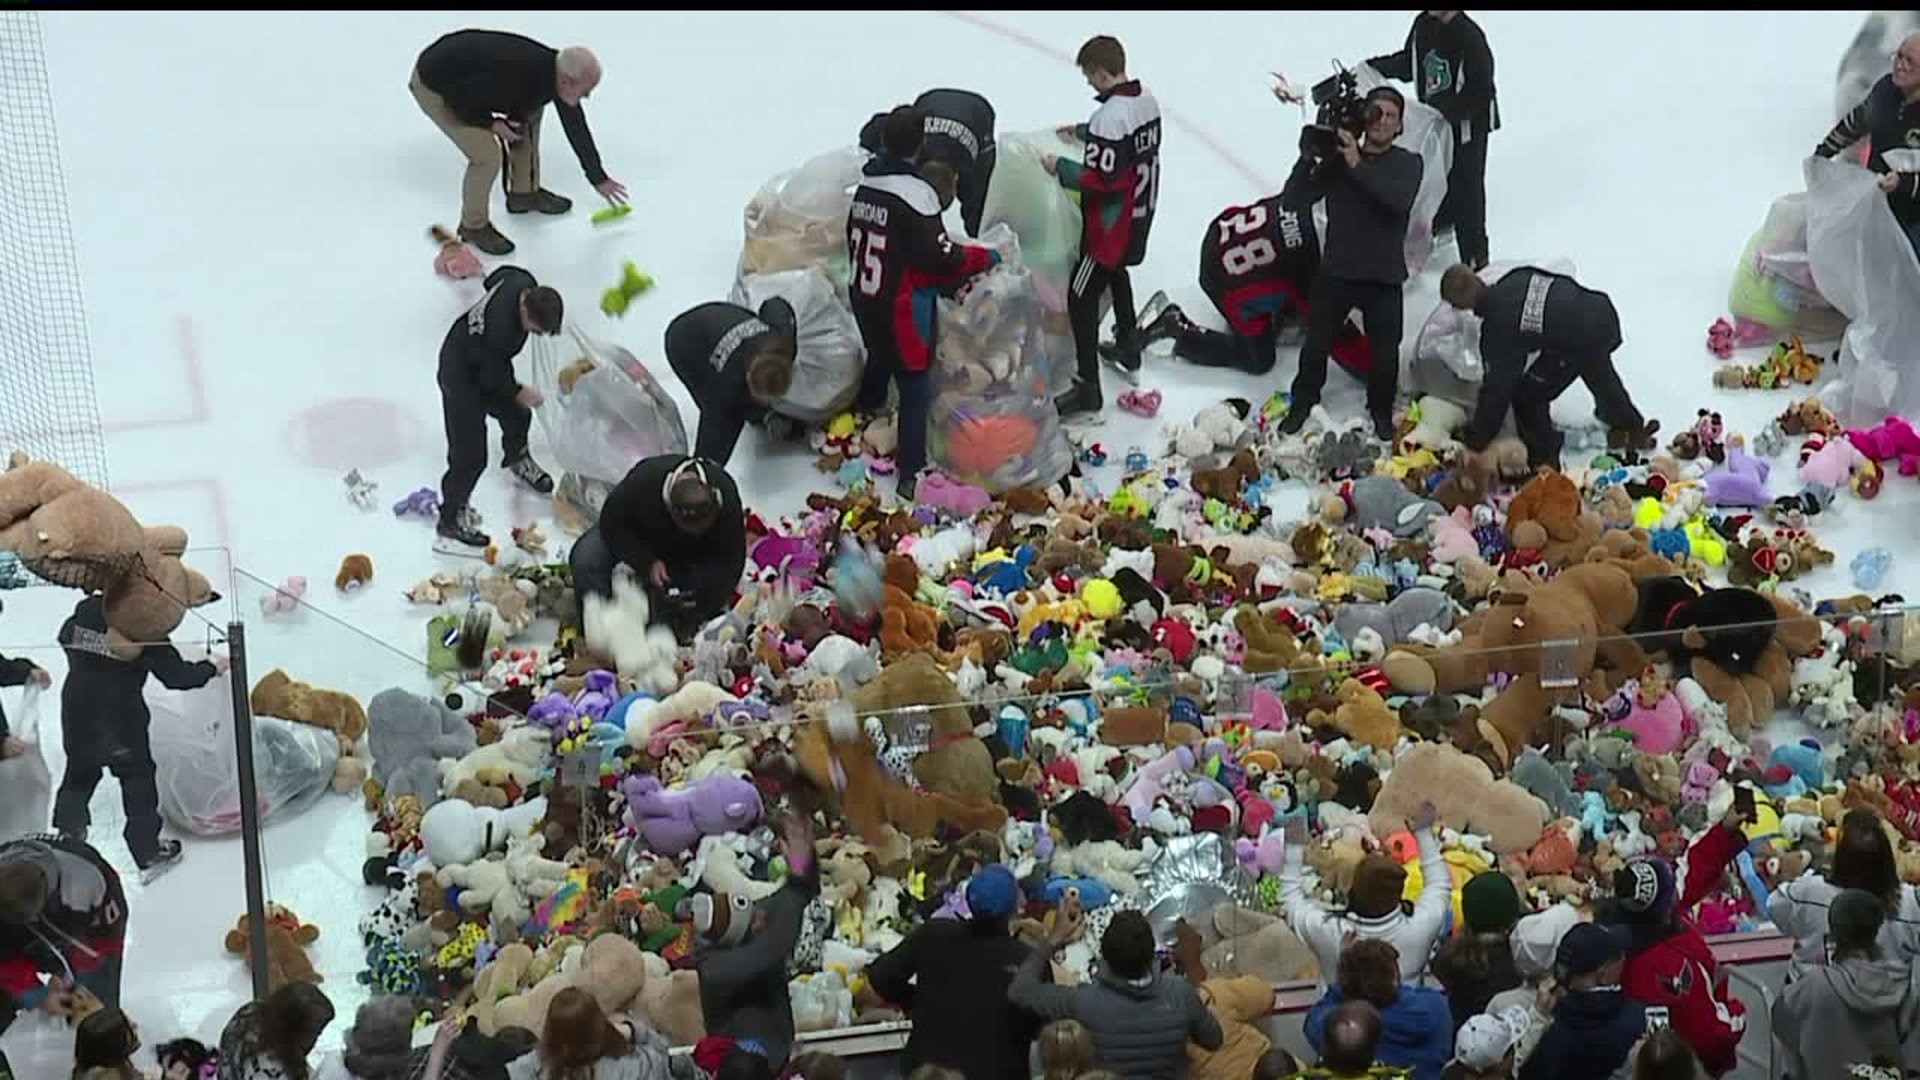 Fans break world record during Teddy Bear Toss at Hershey Bears game